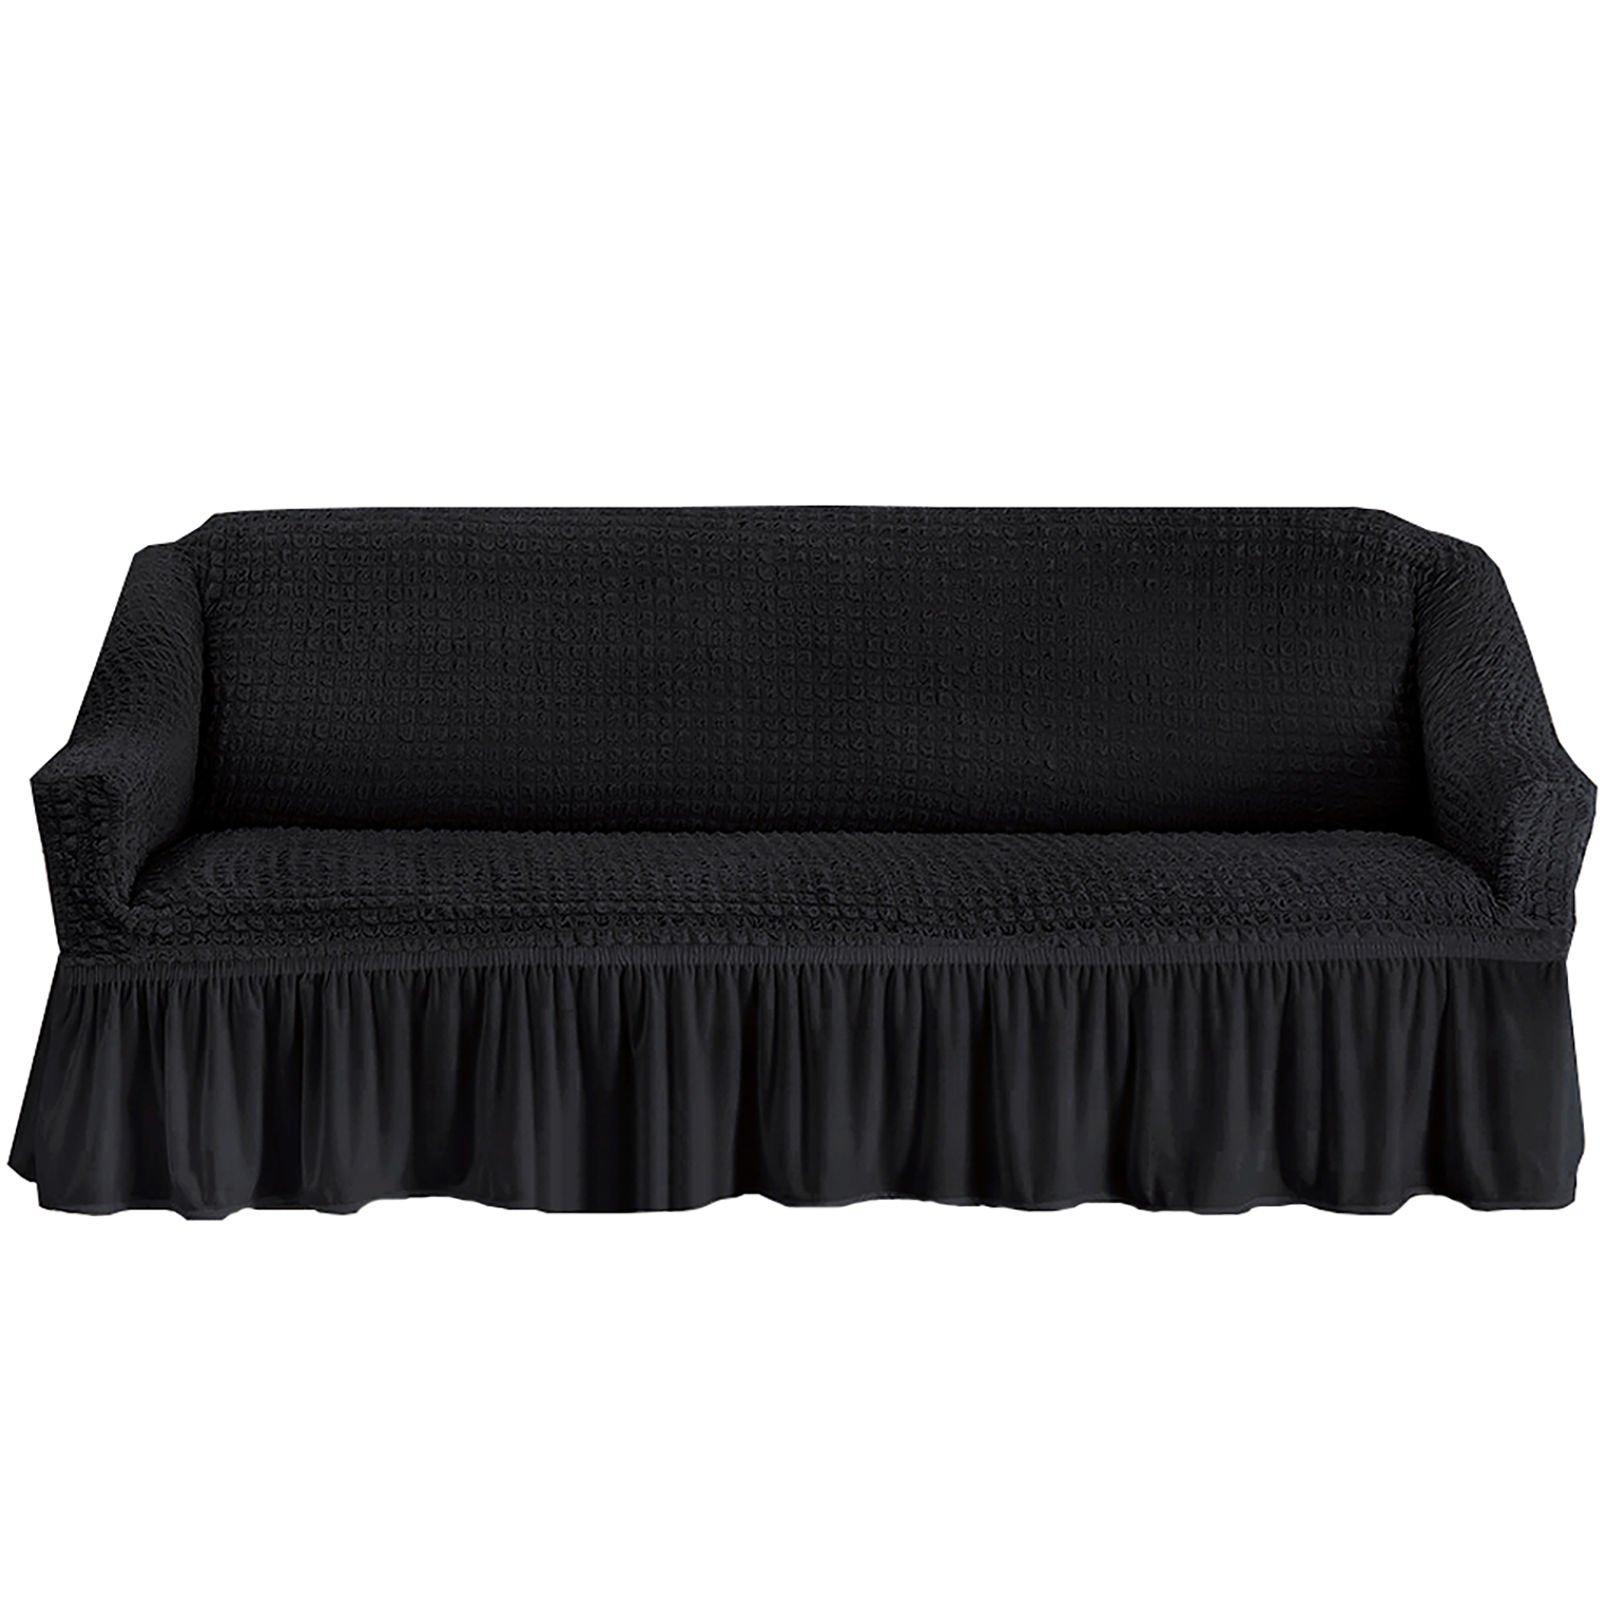 Stretch Sofa Slipcover, 3 Seater Sofa Slipcovers With Skirt With Armless Soft Sofa Cover Elastic Straps Sofa Slipcover For Living Room Kids Pets-black-Large